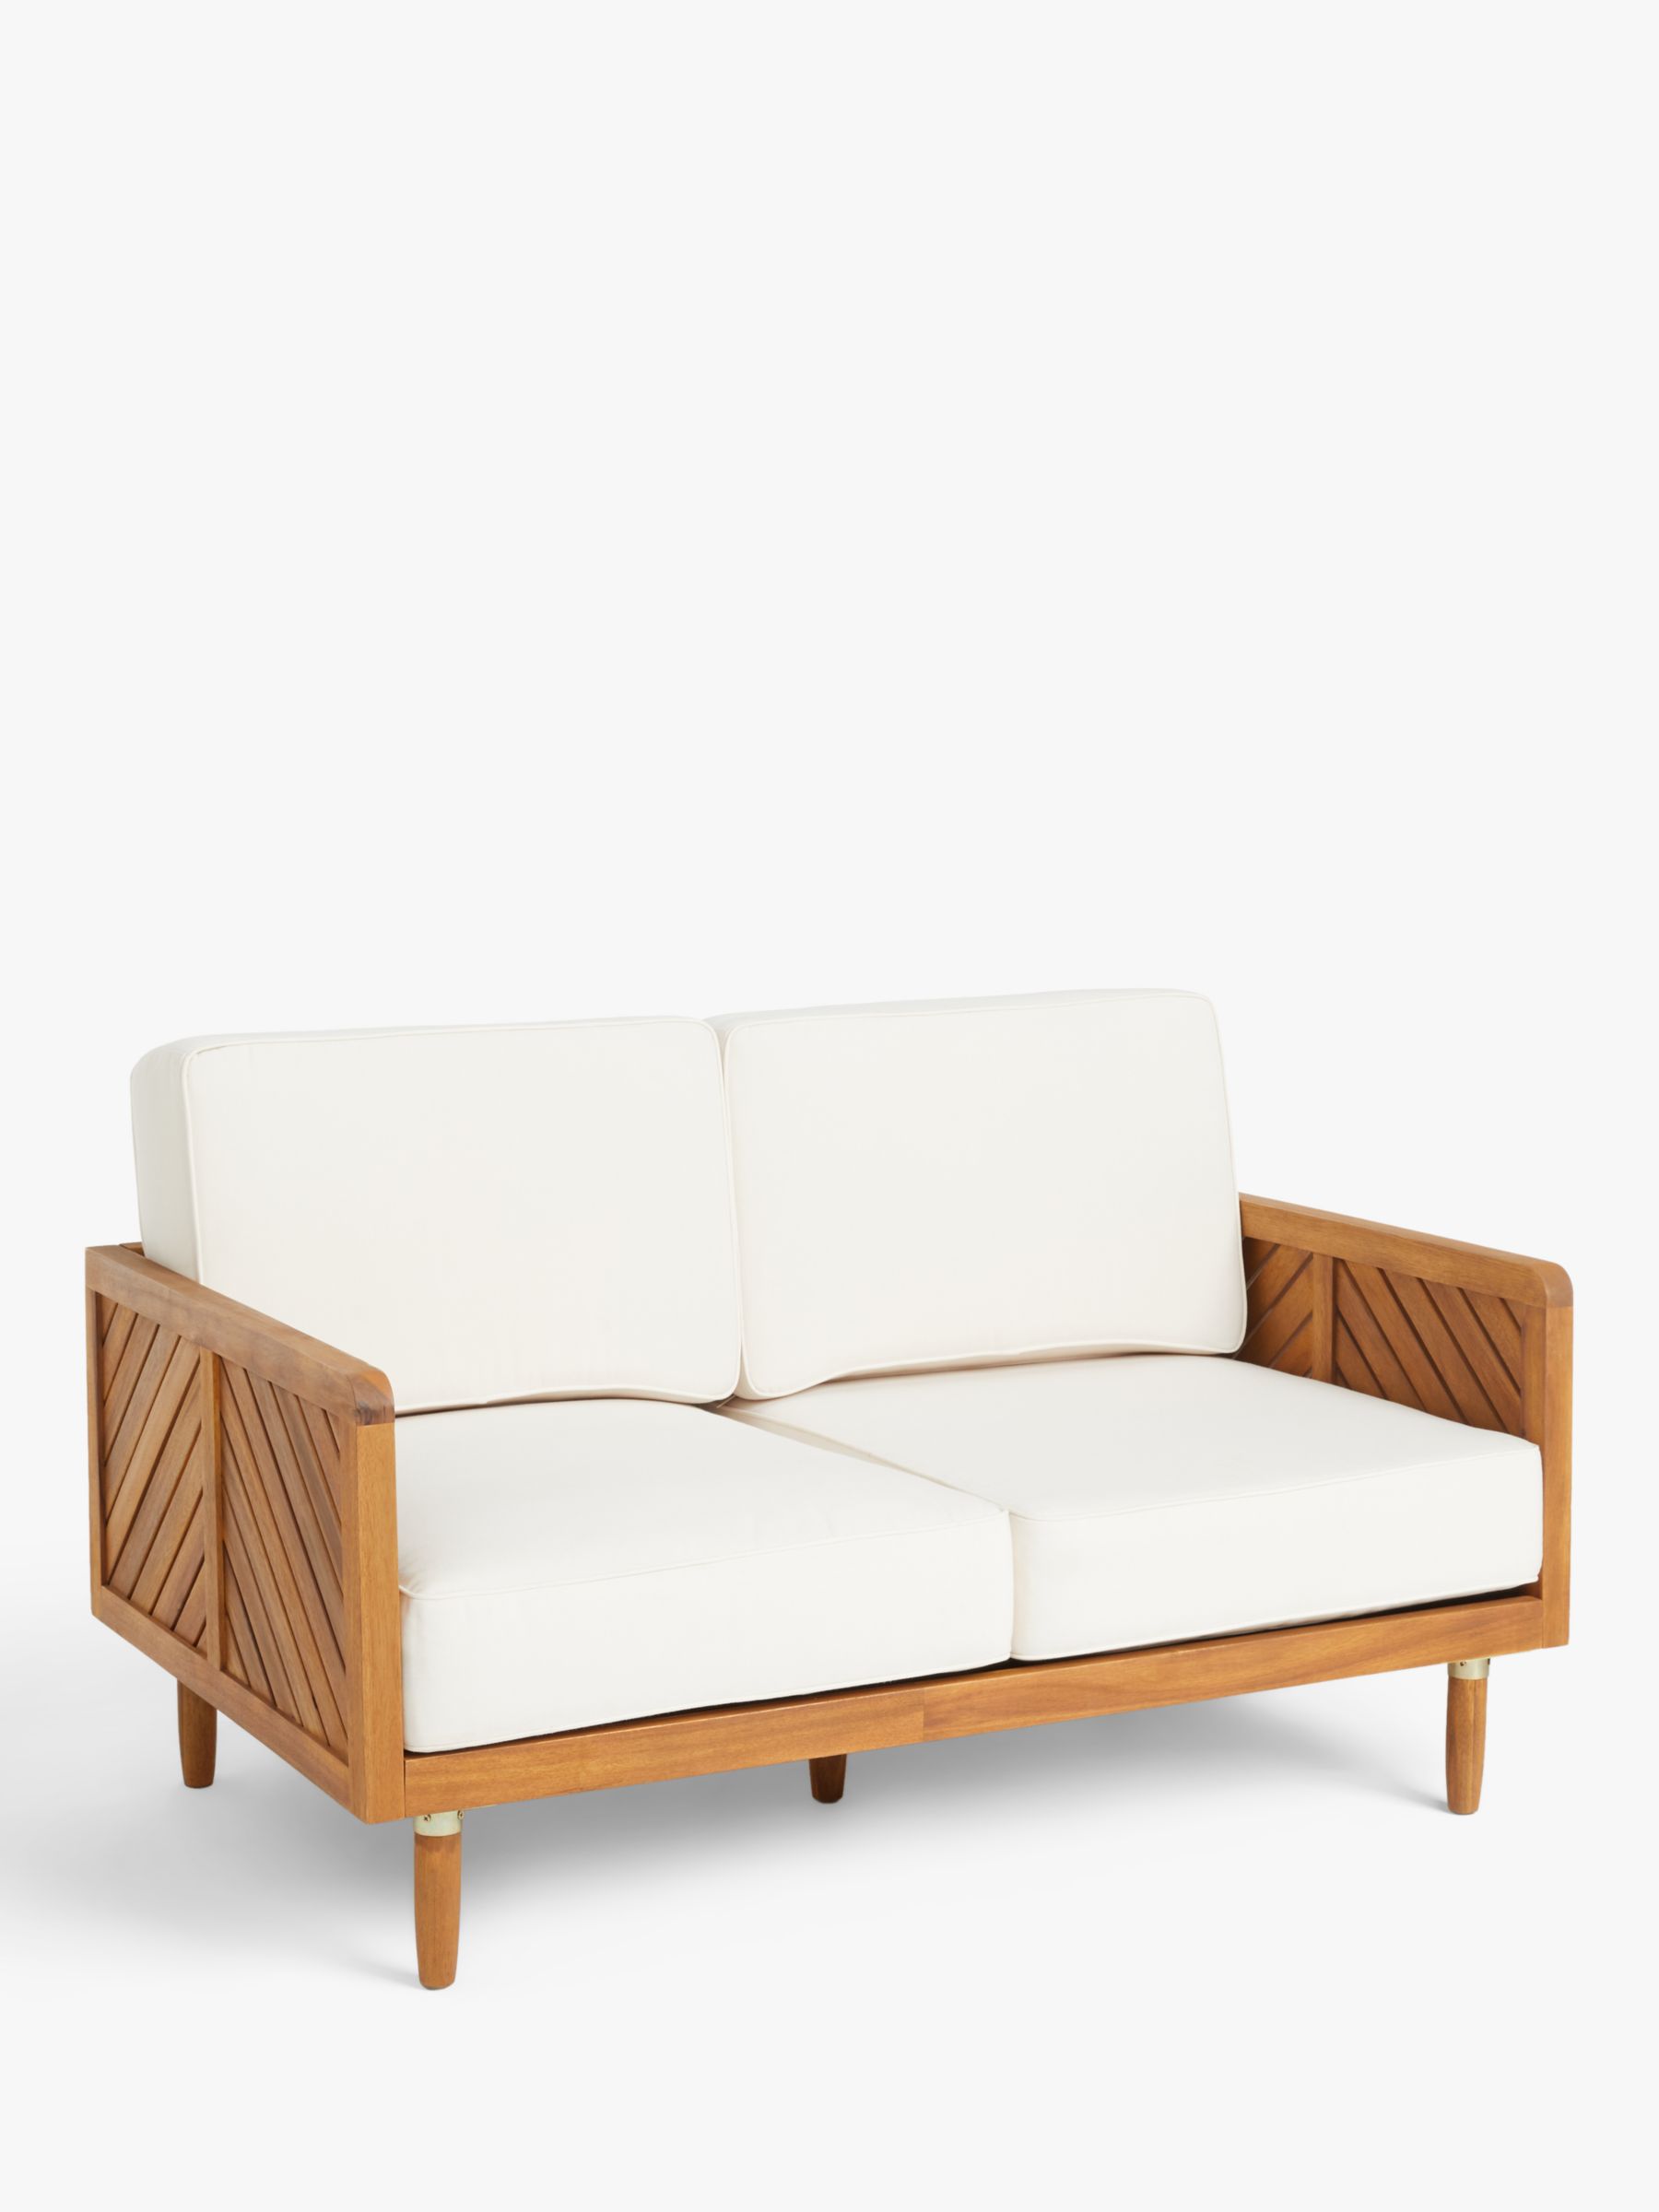 Photo of John lewis + swoon franklin 2-seater garden sofa fsc-certified -acacia wood-